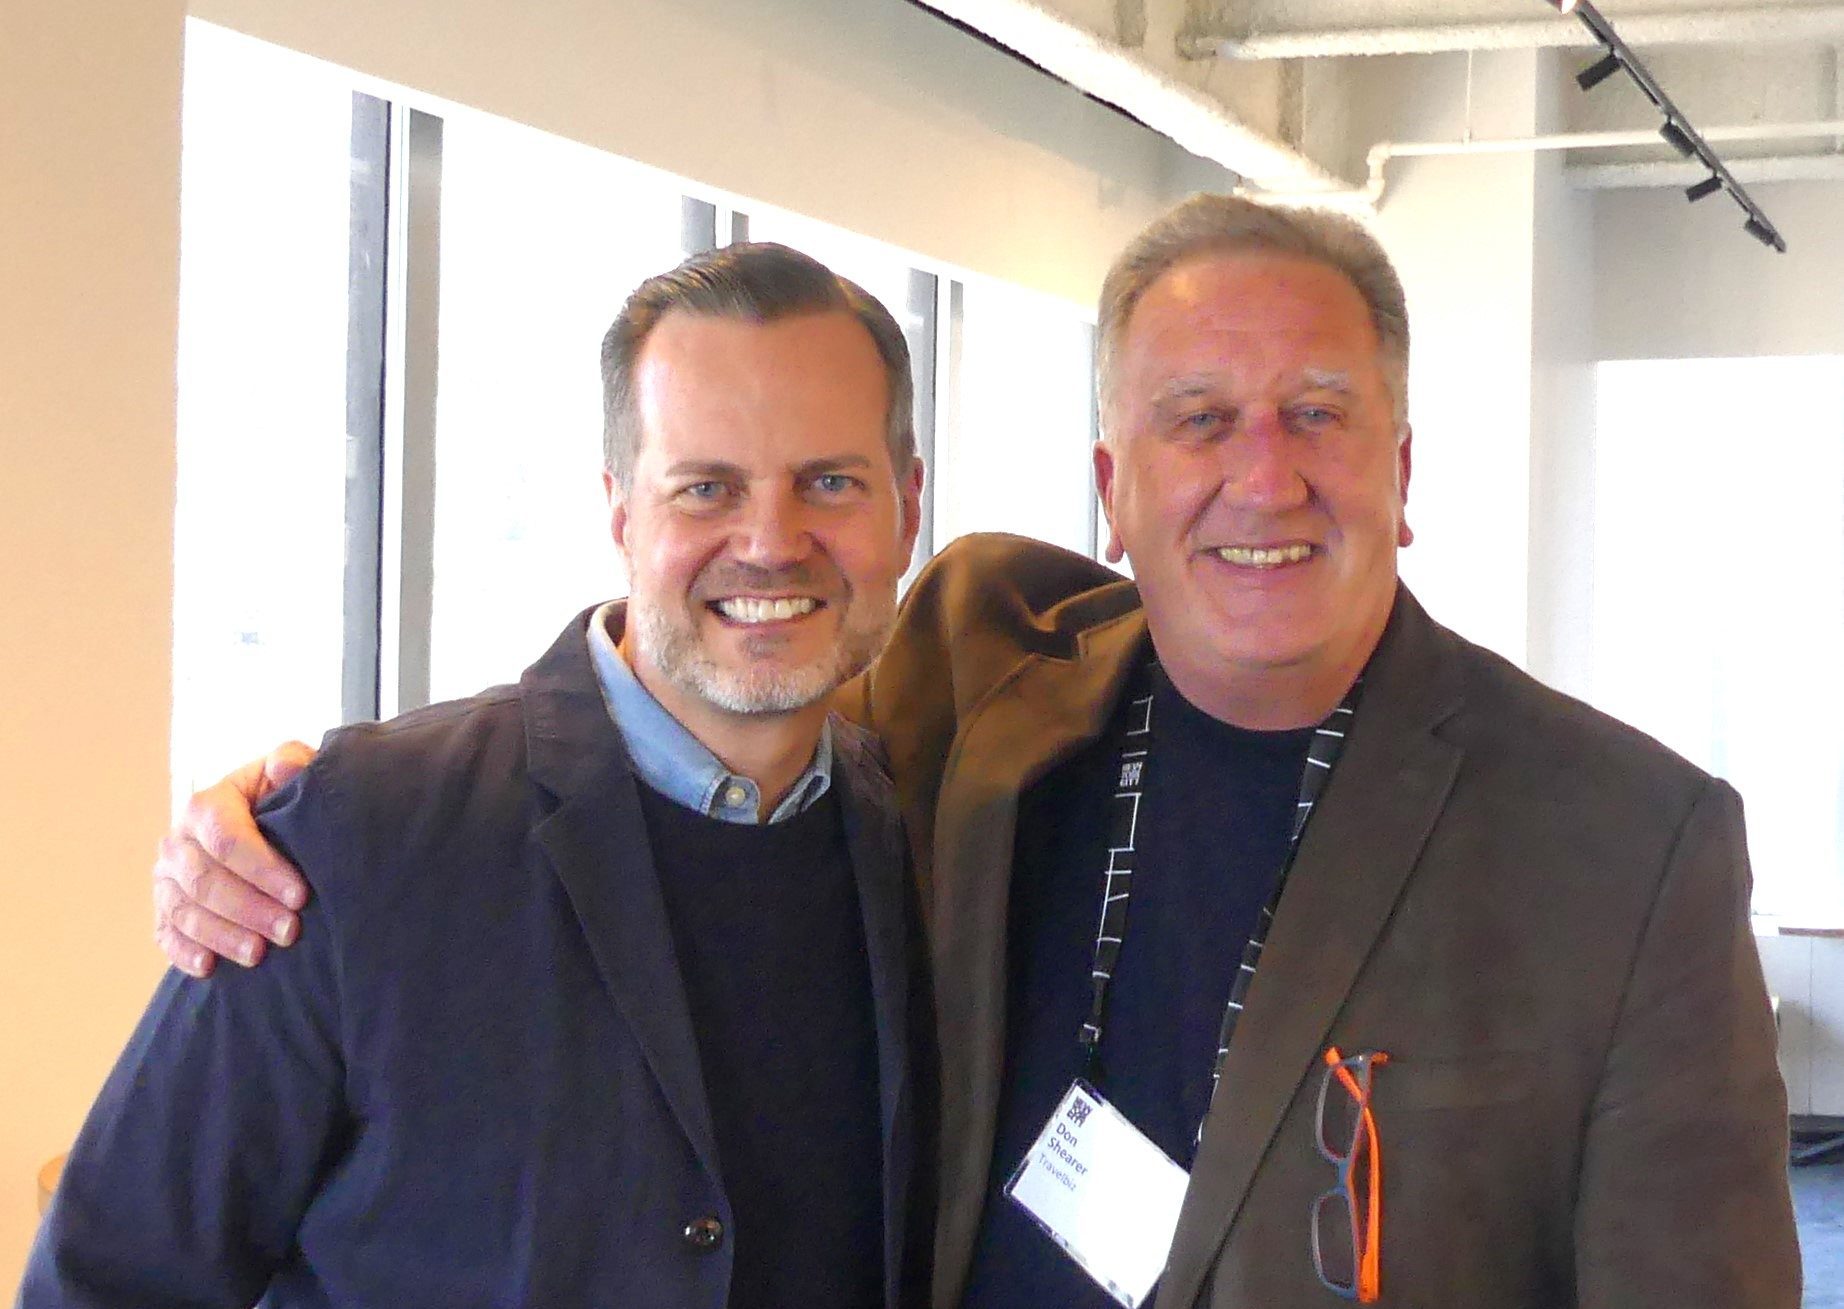 Don Shearer (Travelbiz) explores NYC with Fred Dixon, President and CEO New York City Tourism & Conventions.